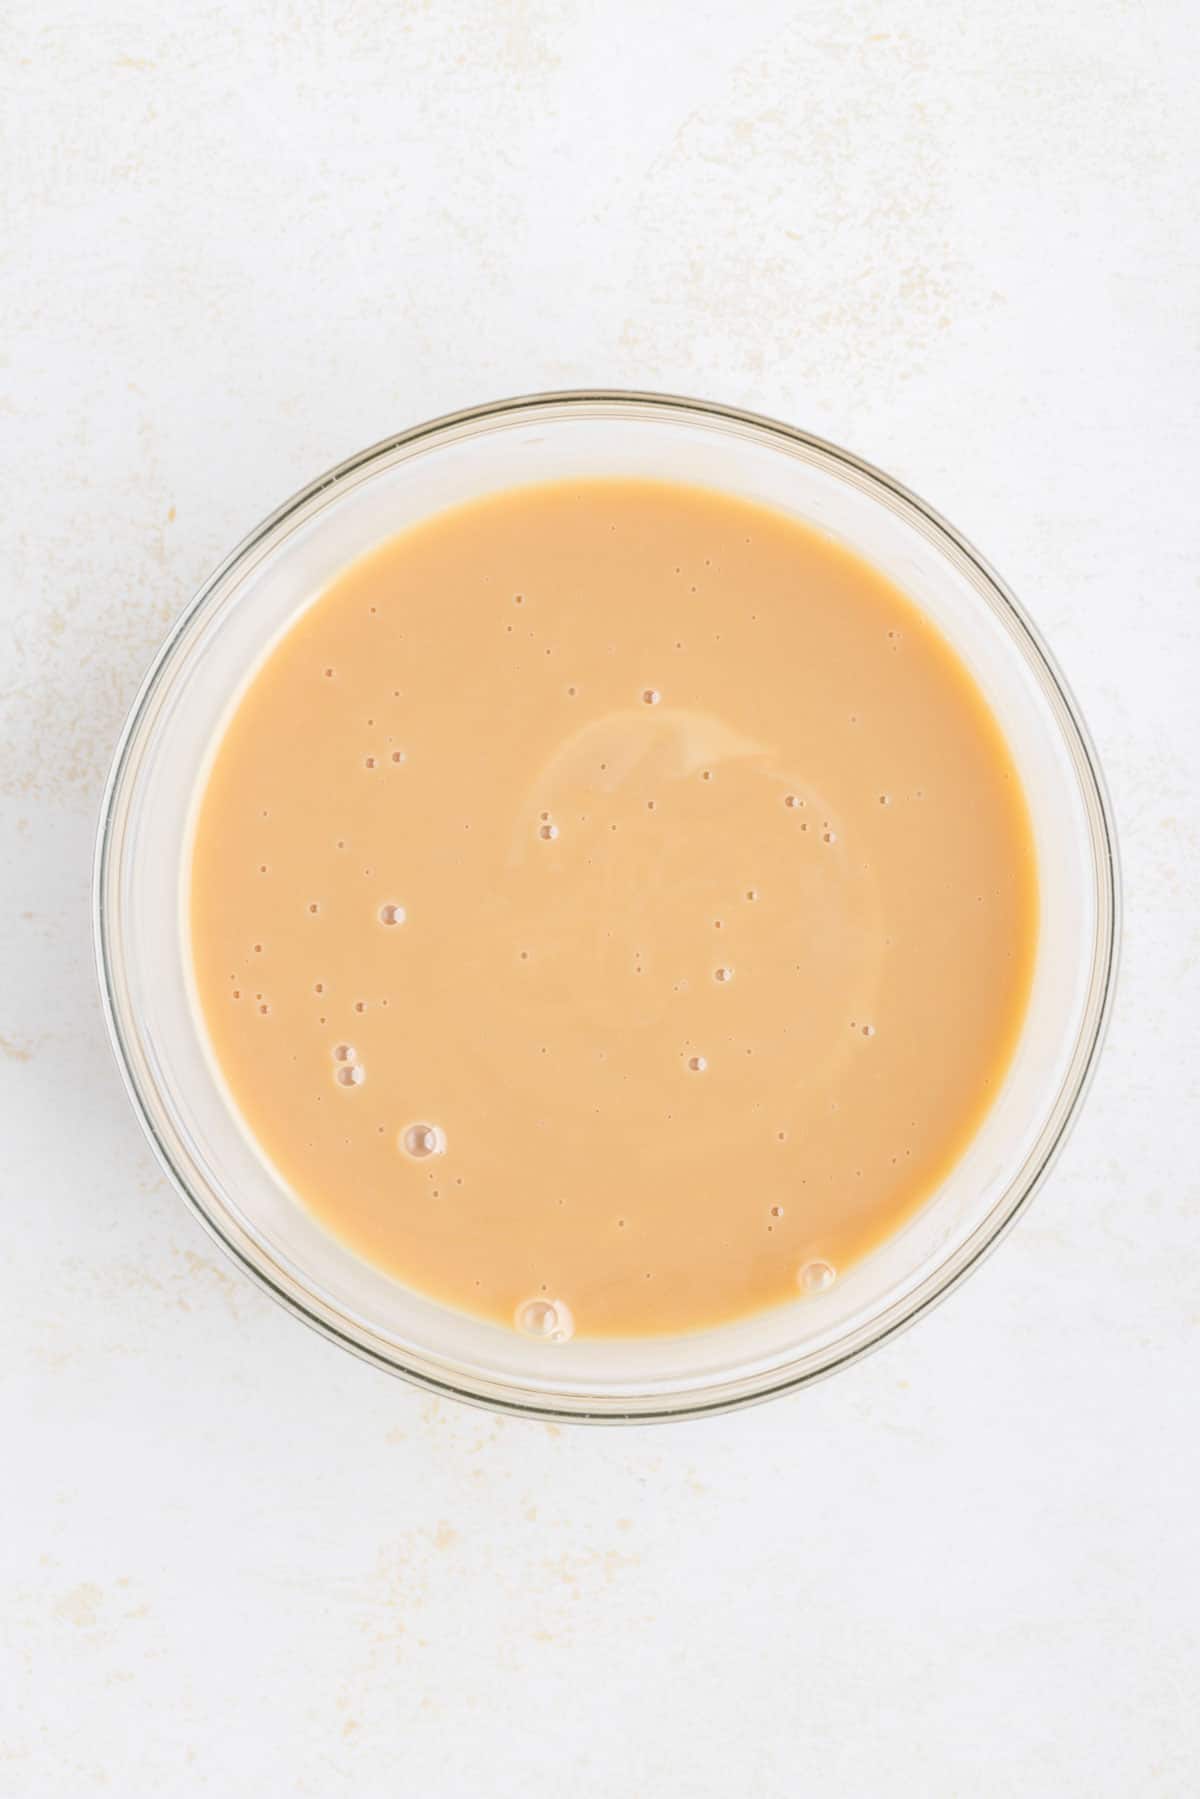 caramel and condensed milk mixture in a mixing bowl